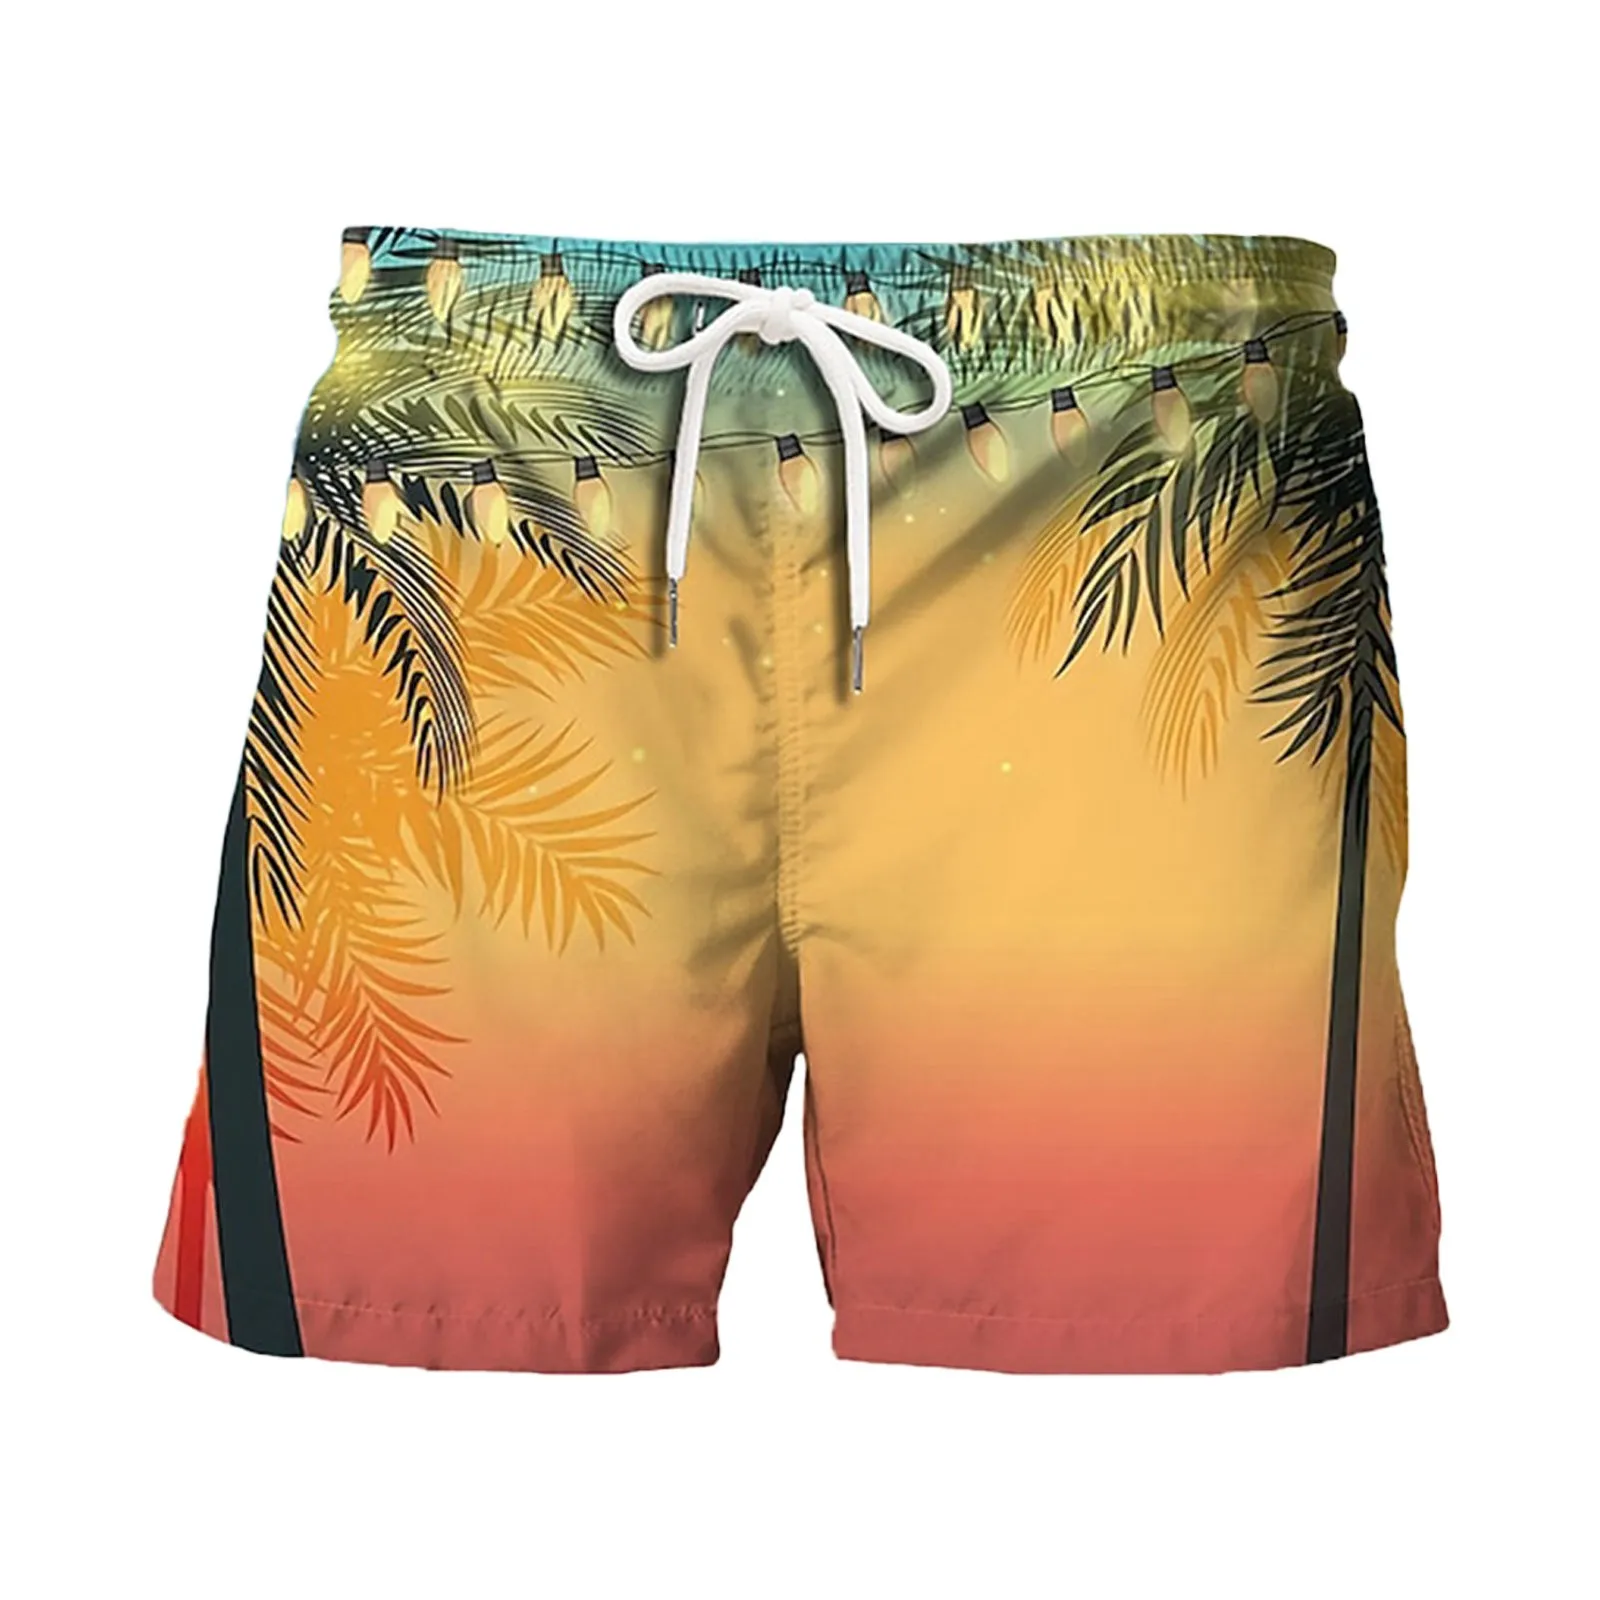 

Mens Swim Trunks Pocket Men's Spring And Summer Casual Shorts Printed Panel Sports Beach Pants Board Shorts with Brief Liner